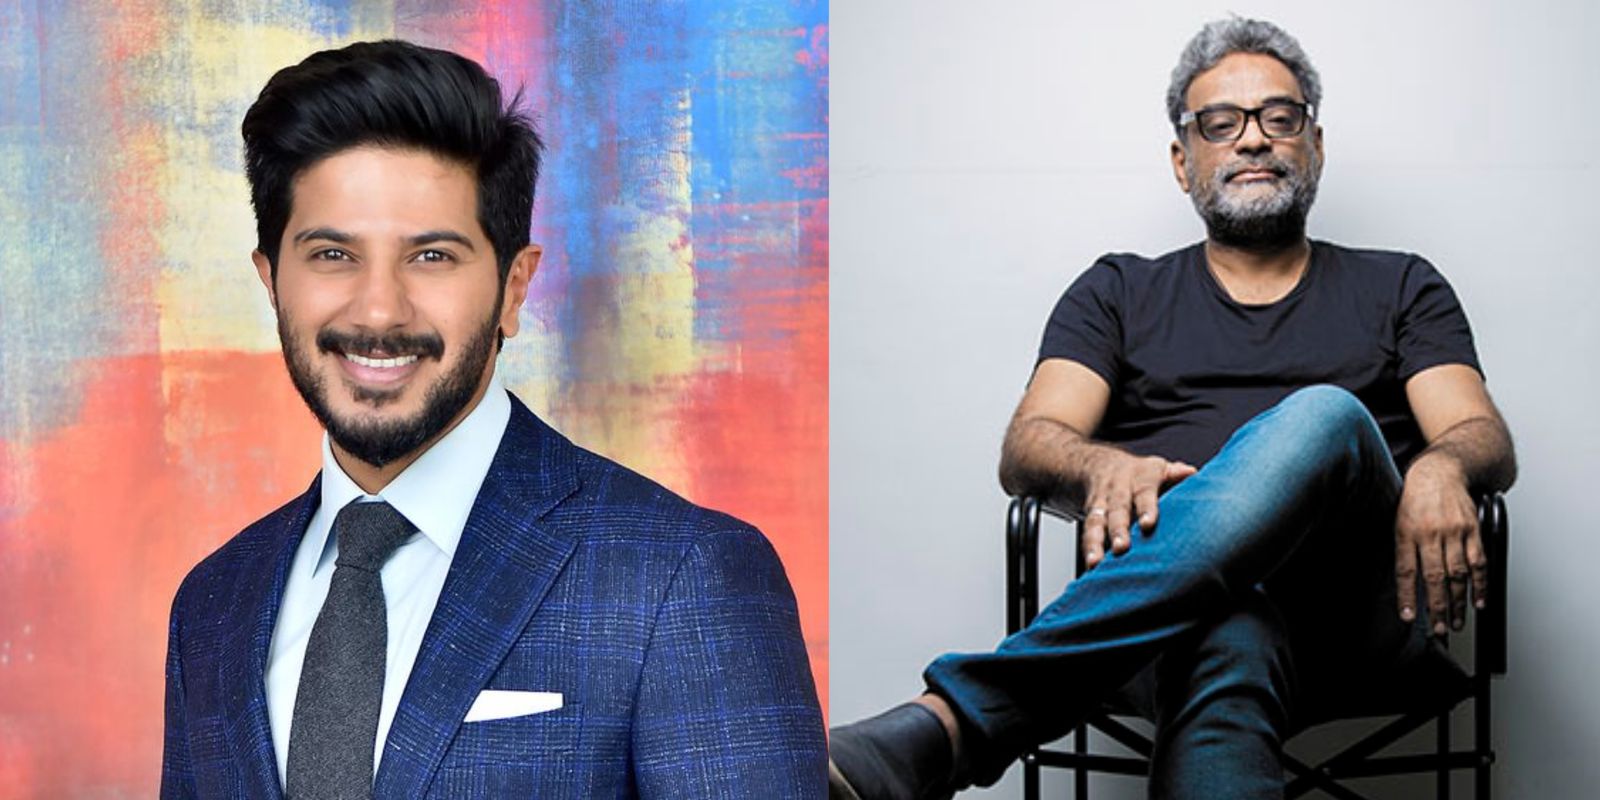 Dulquer Salmaan To Collaborate With Director R. Balki For A Thriller? Read Details...